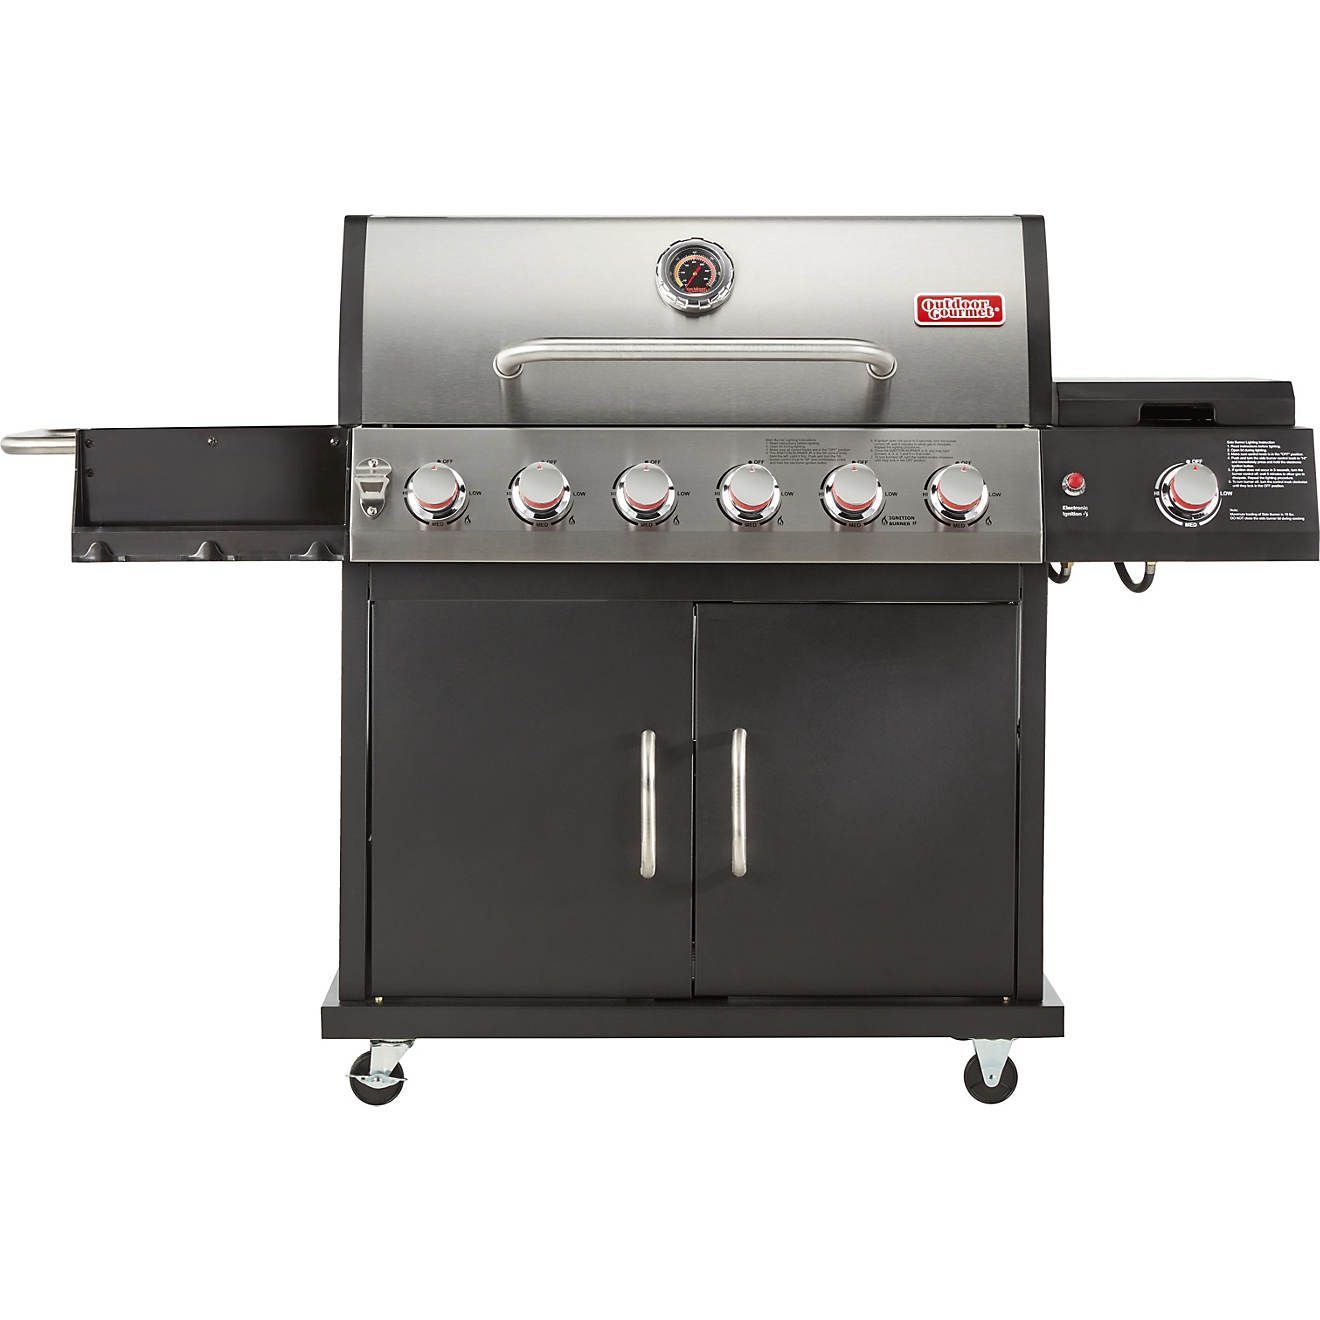 Outdoor Gourmet 6-Burner Gas Grill | Academy | Academy Sports + Outdoors